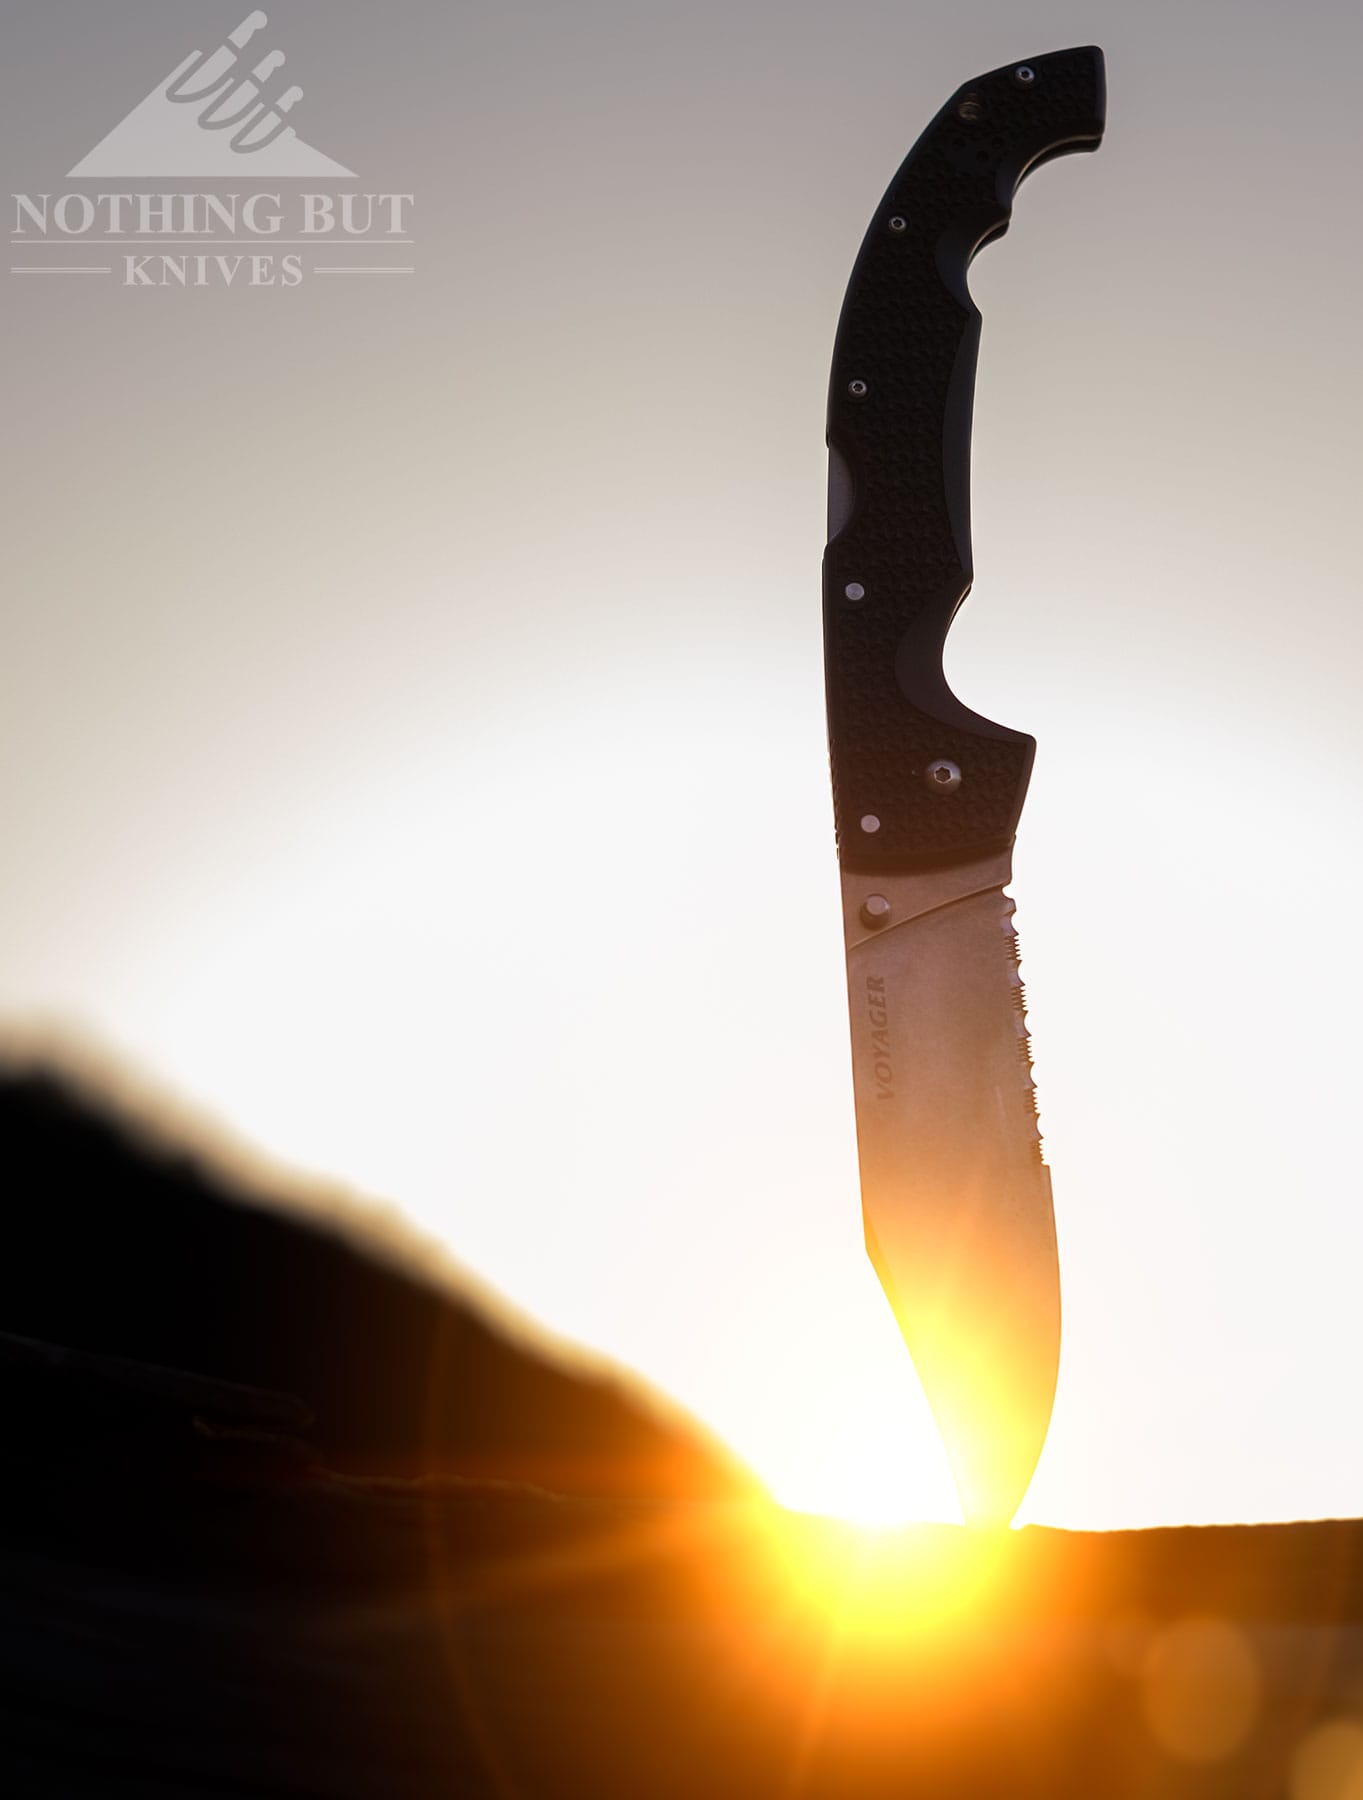 The Cold Steel Voyager XL pocketknife sticking out of a log at sunset.